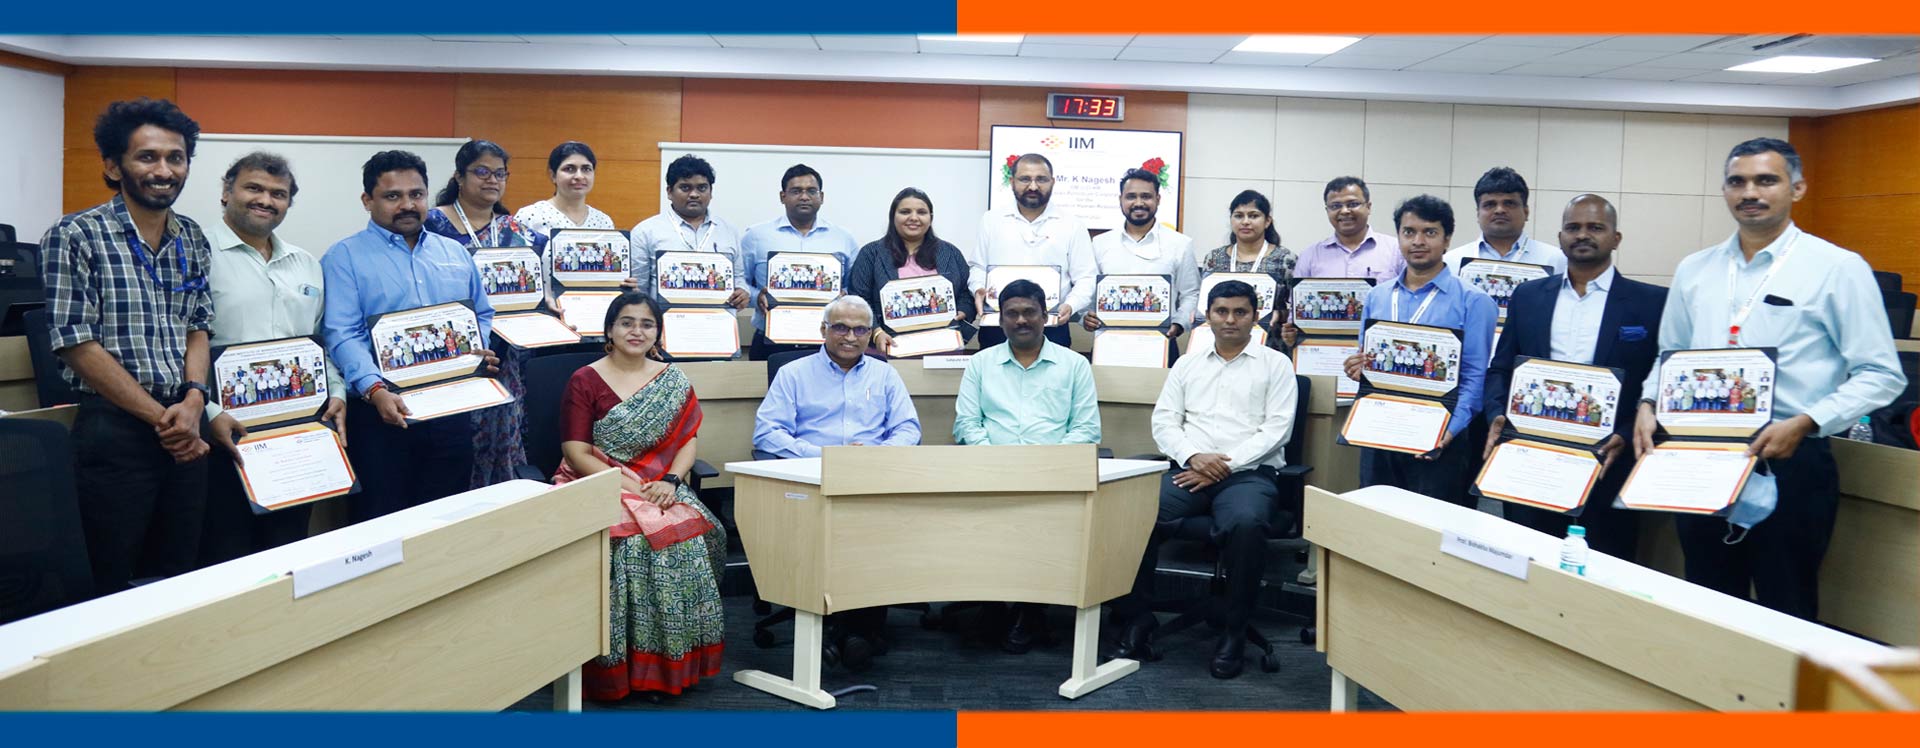 IIMV concludes the Professional Program in Human Resource Management for HPCL officers